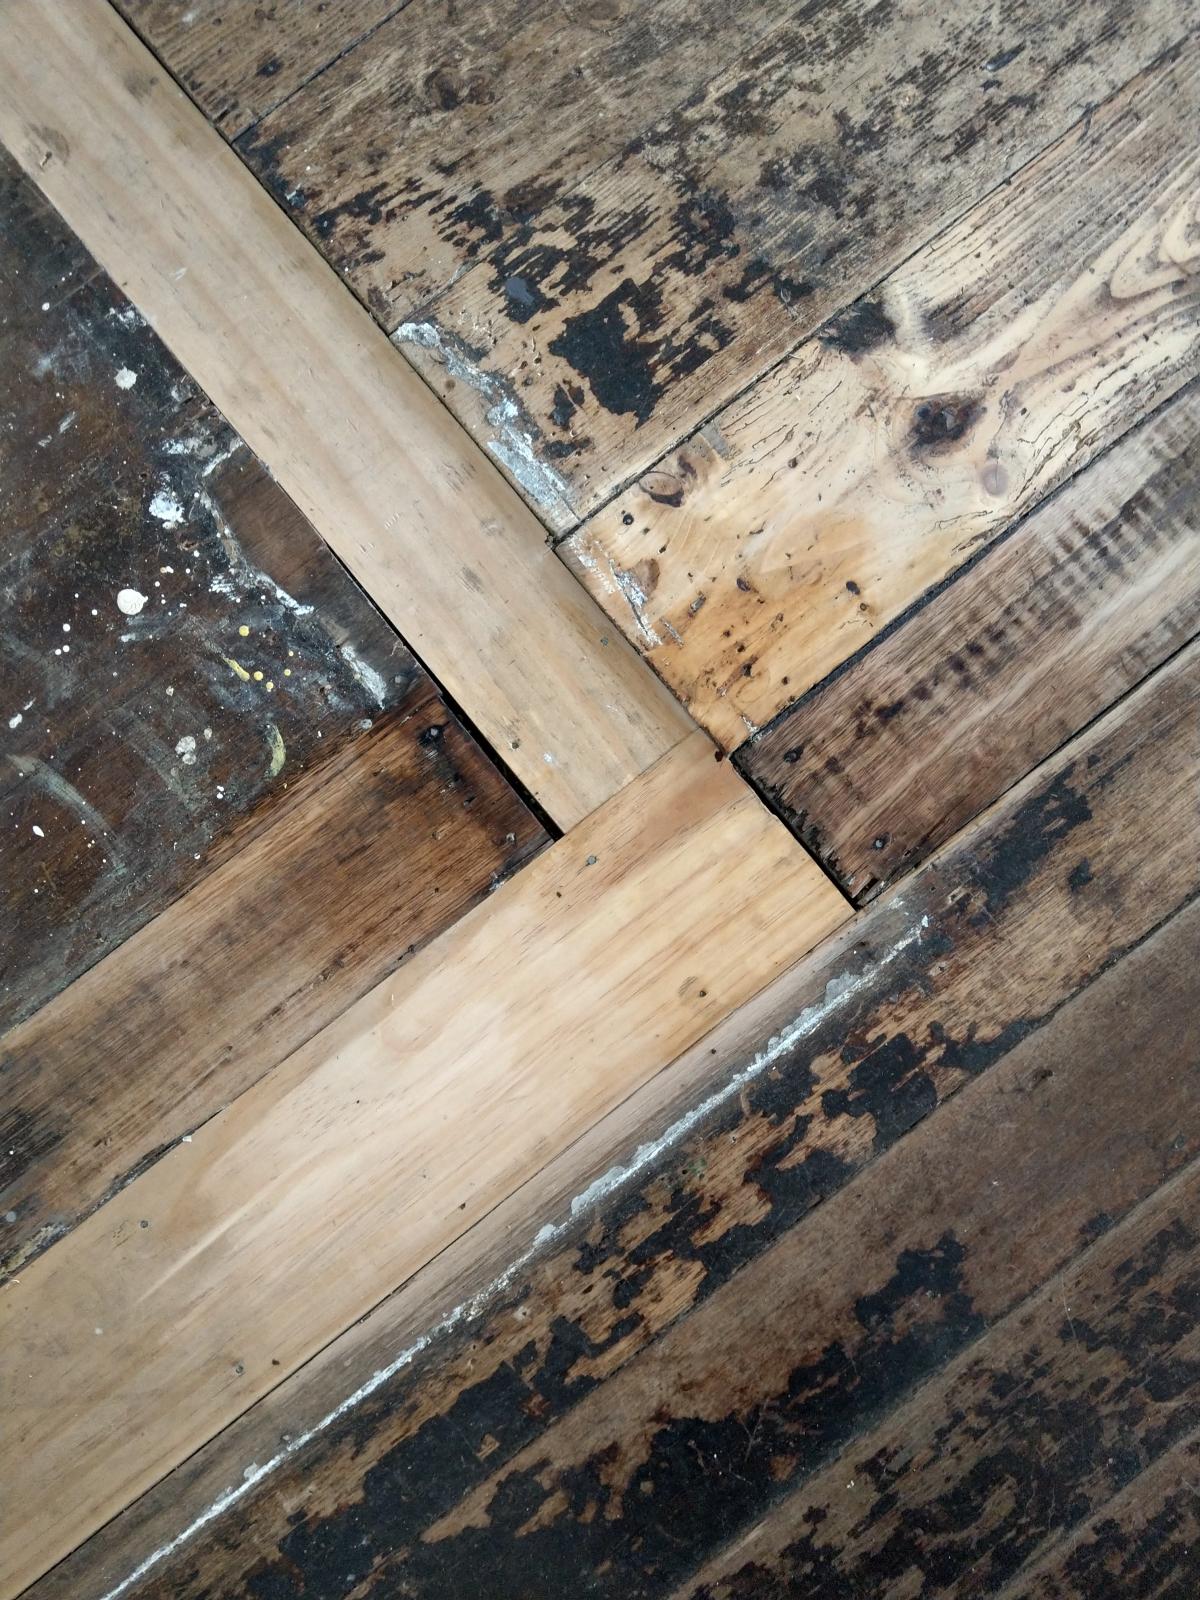 What floor timbers are these?